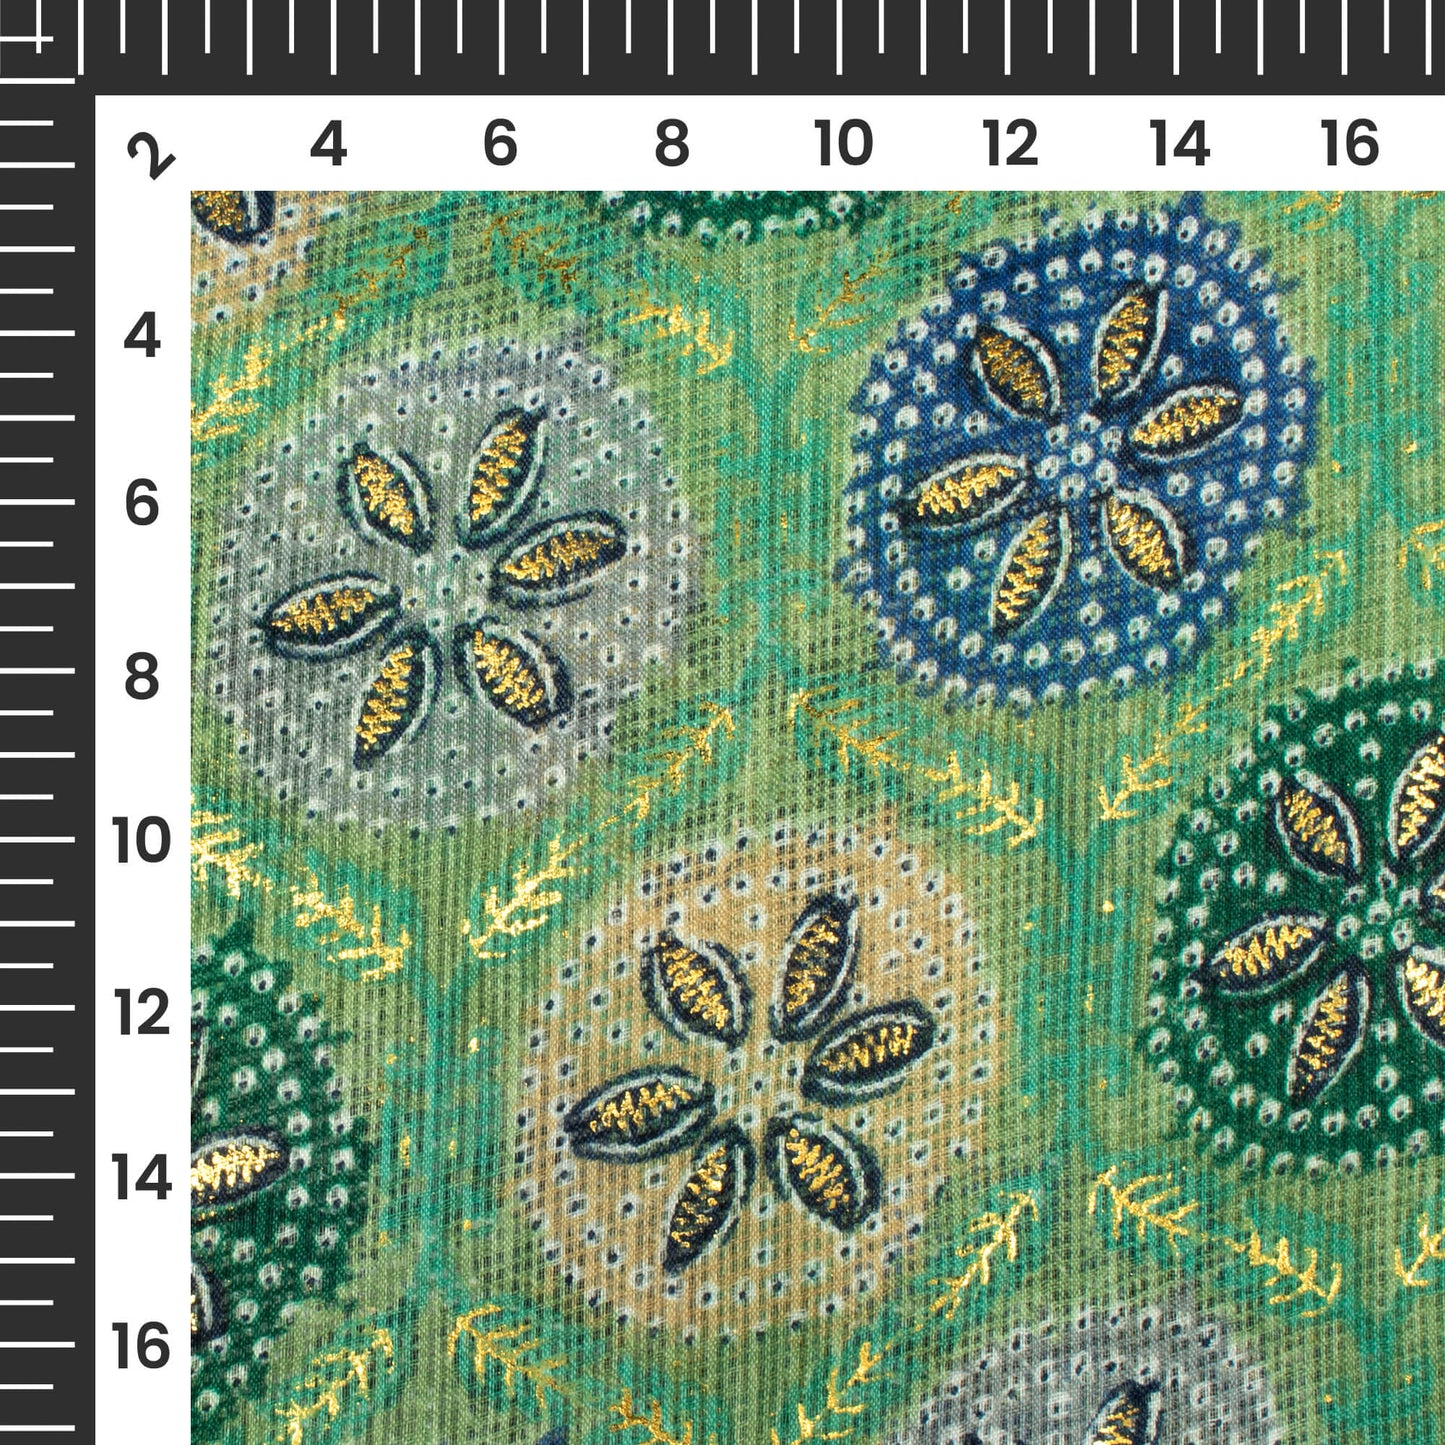 Middle Green And Space Blue Traditional Pattern Foil Print Kota Doria Fabric